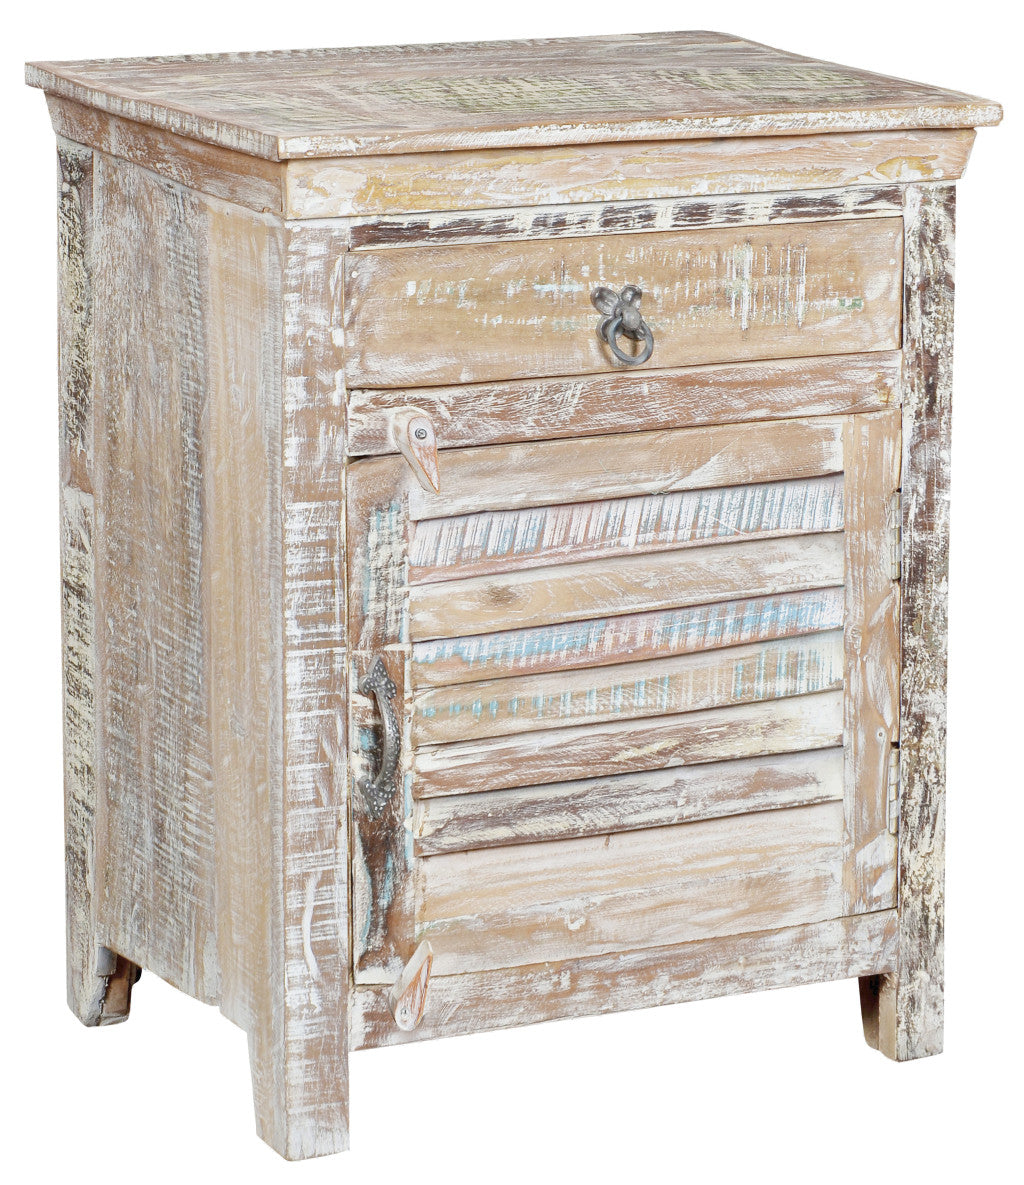 30" Distressed White One Drawer Shutter Solid Wood Nightstand